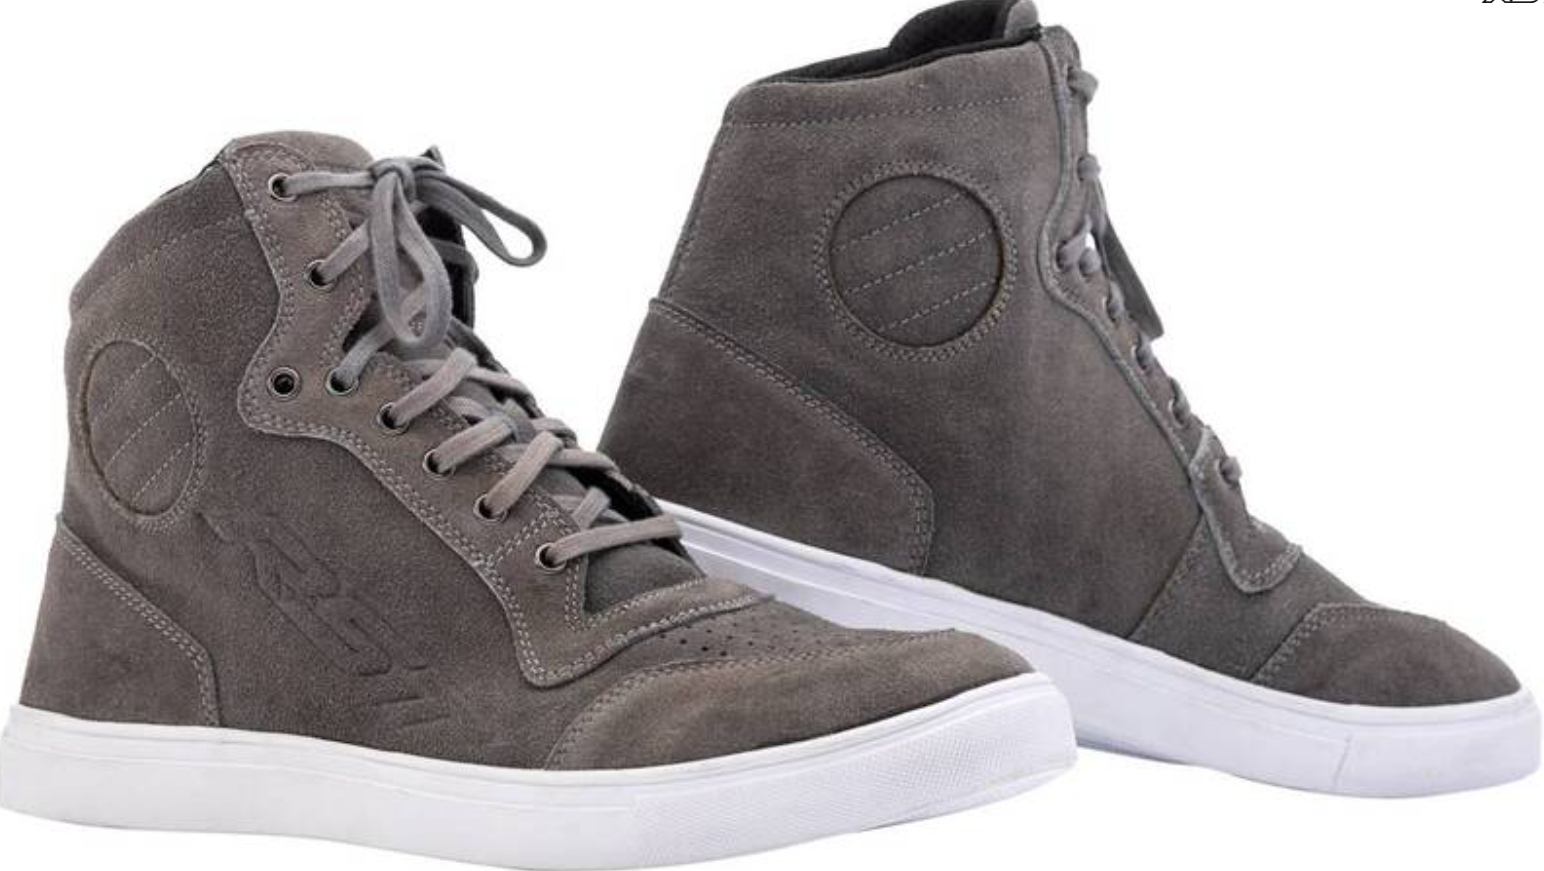 Image of RST Hitop Moto Sneaker Ladies Ce Boot Grey Size 38 ID 5056136296133